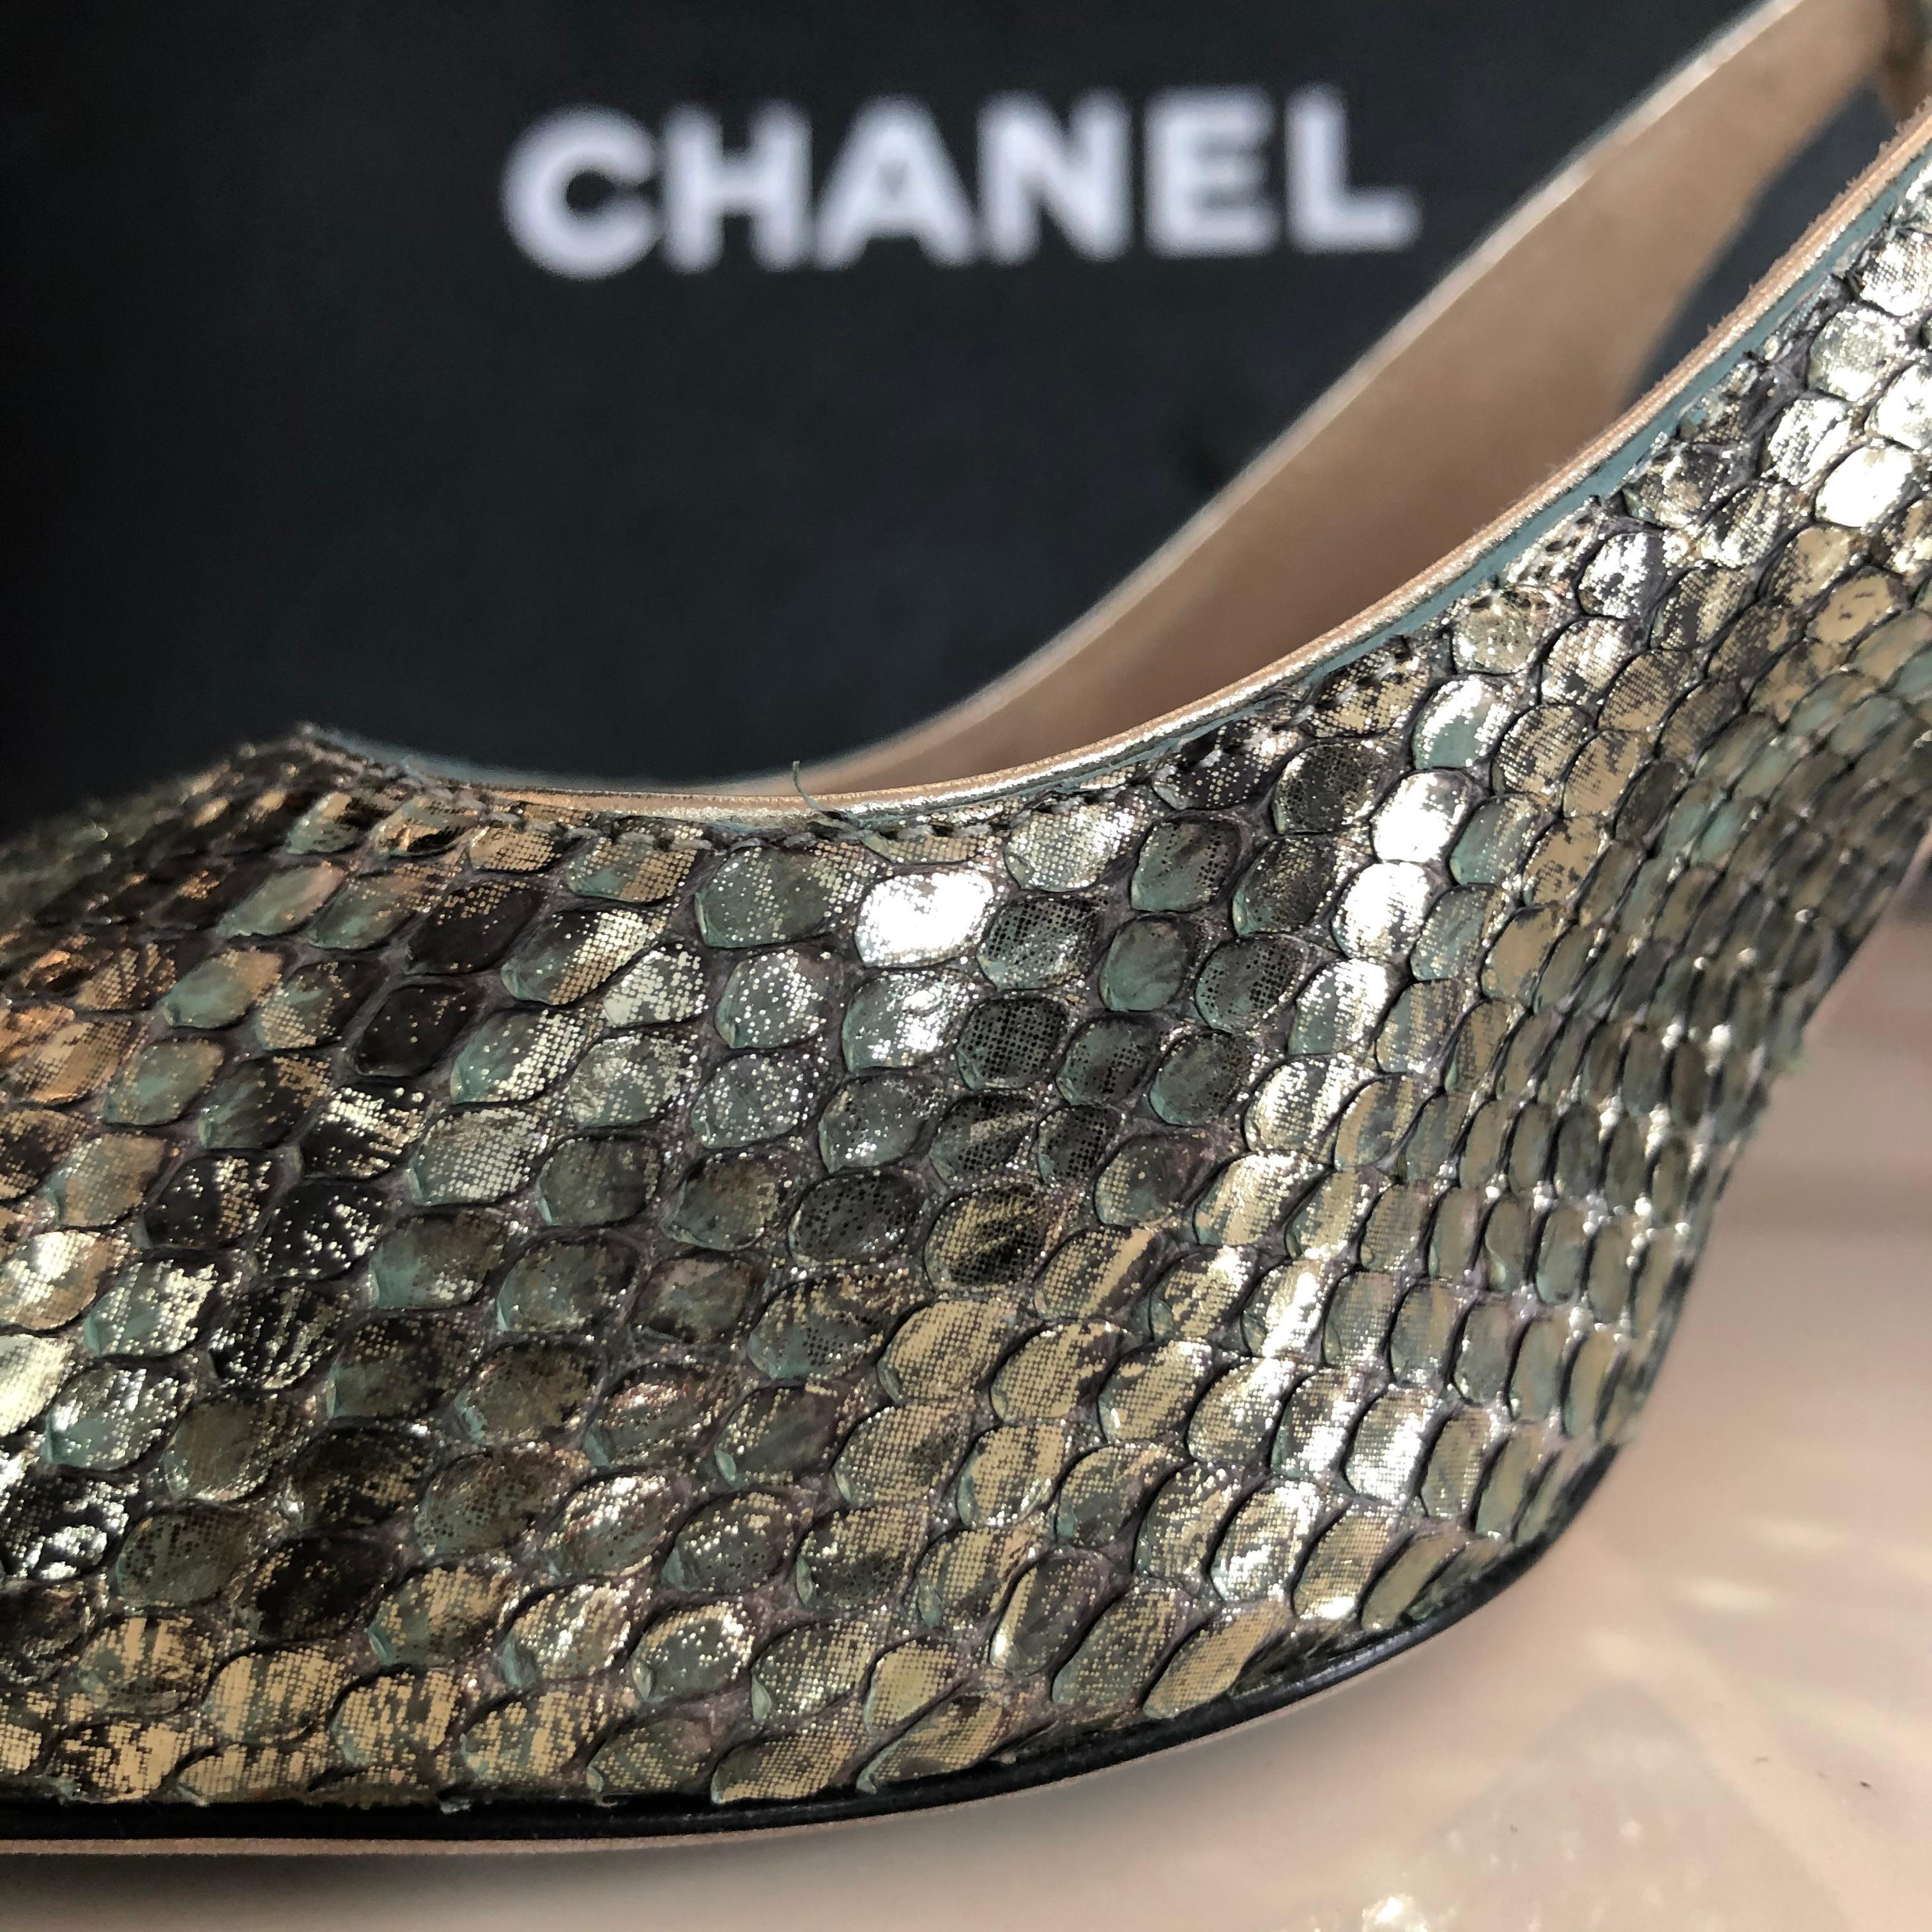 Chanel Slingbacks with a gold-tone buckle and a CC symbol at the back of the heel. The heels are covered with a cotton grosgrain fabric. Lovely python effect in green and gold tone. Gently worn. Th heels are in mint condition, and measure 8 cm high.